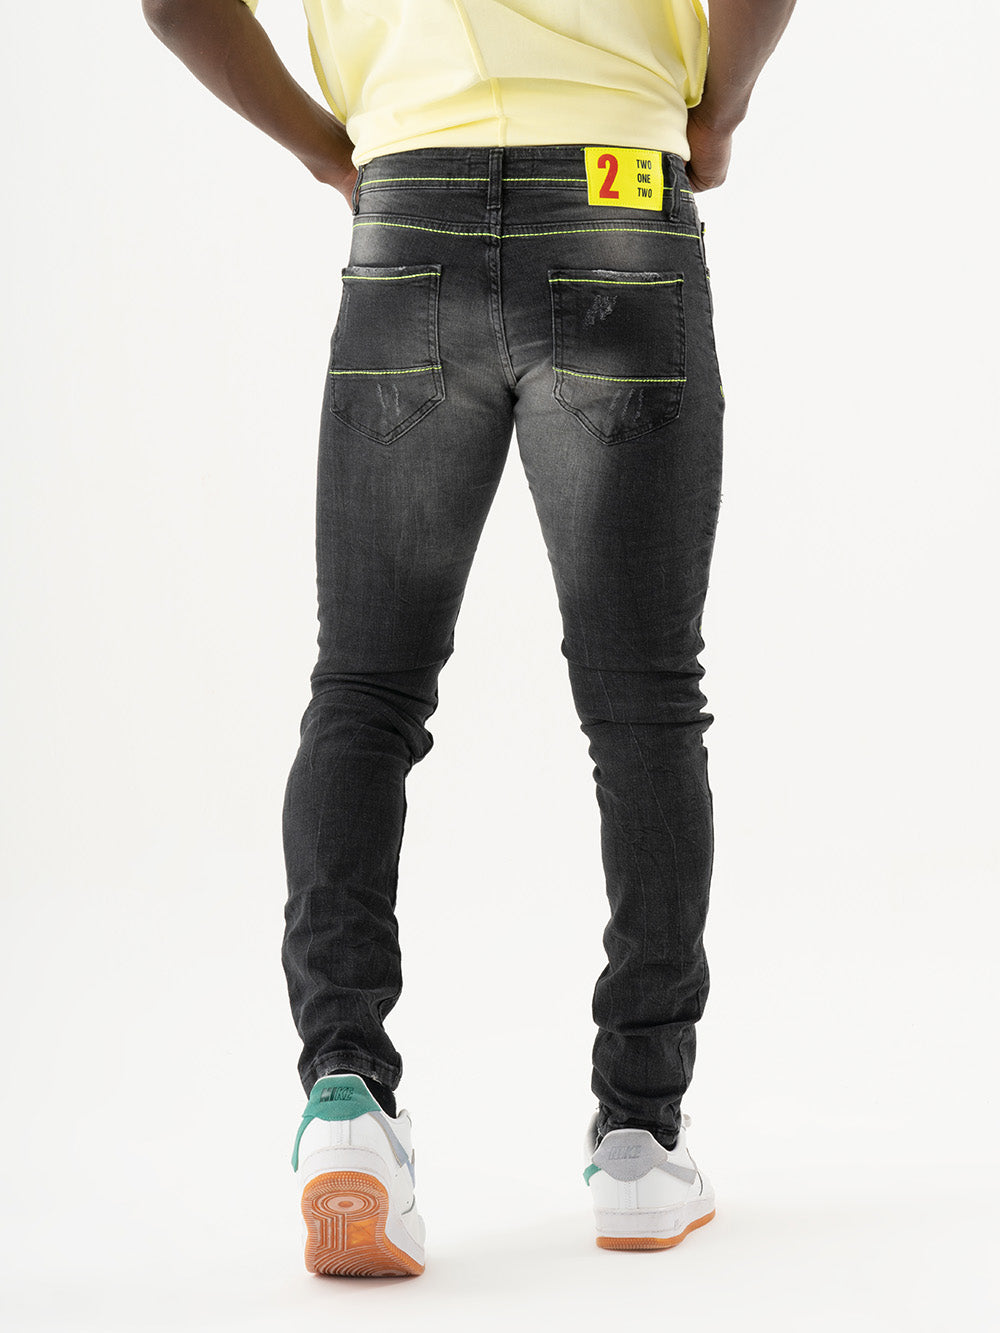 The back of a man wearing INKLING skinny fit black jeans and a yellow t-shirt.